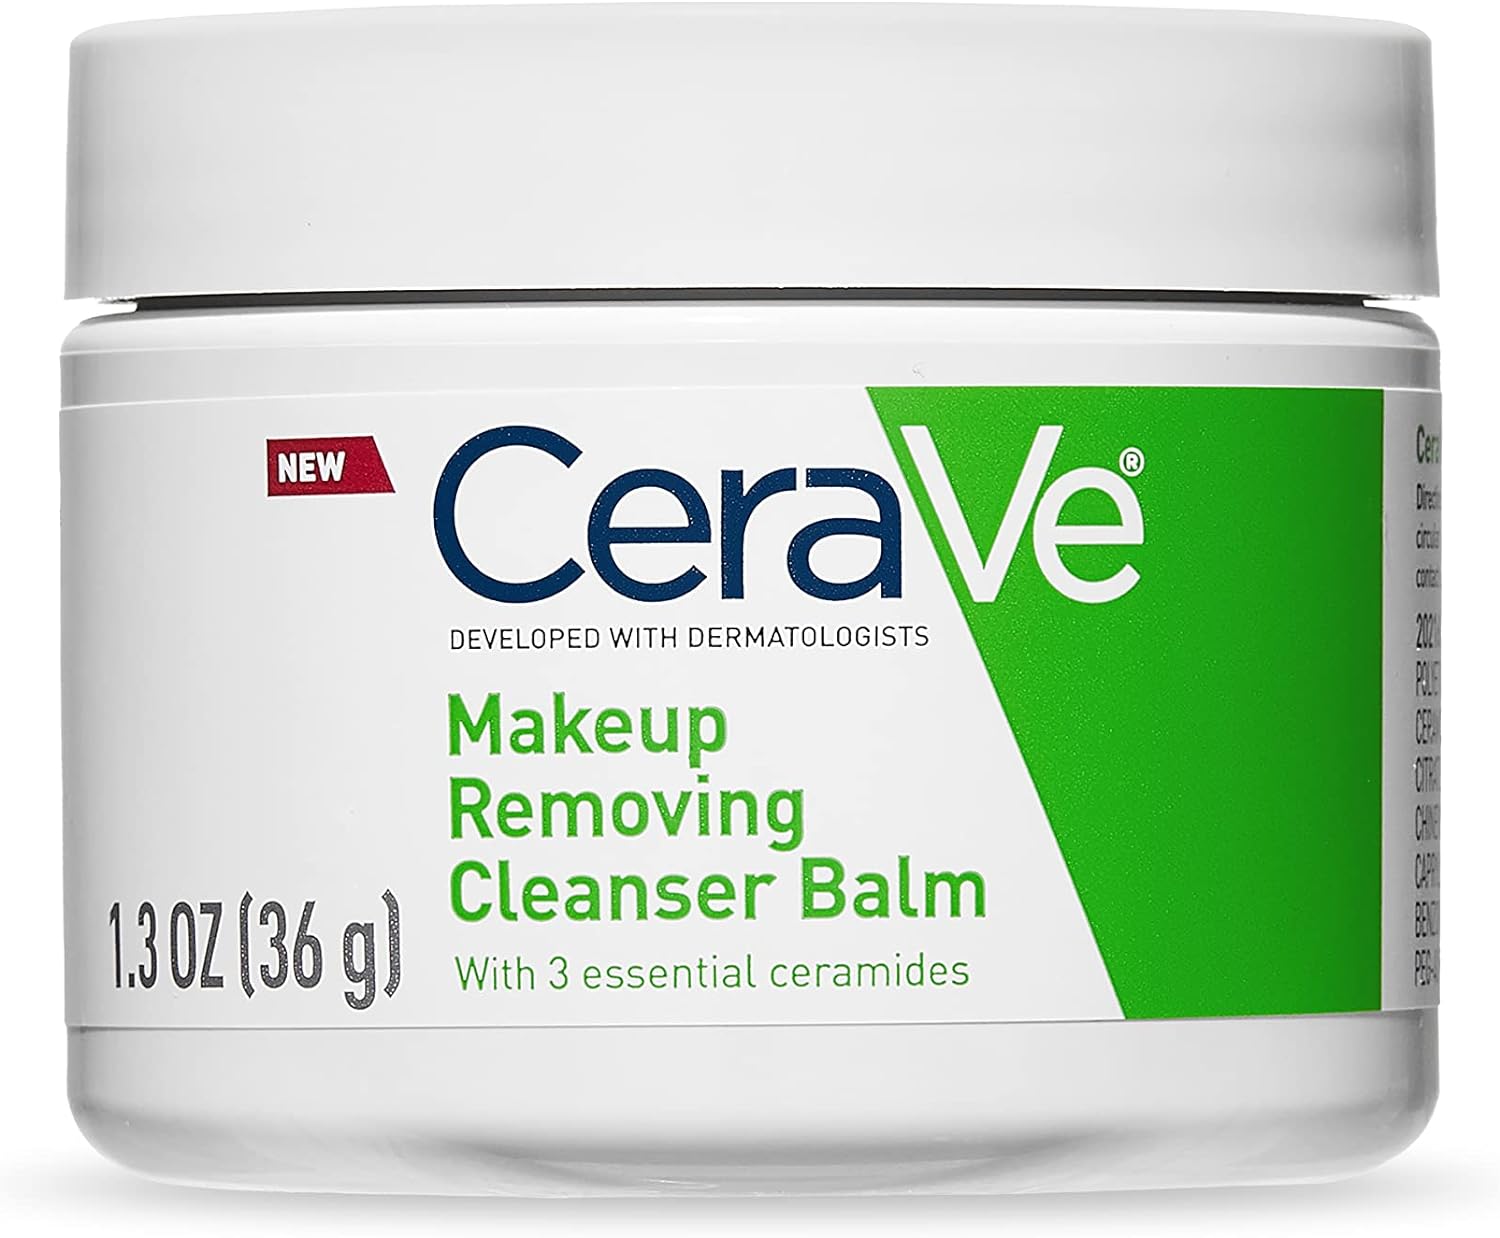 CeraVe Cleansing Balm | Hydrating Makeup Remover with Ceramides and Plant-based Jojoba Oil for Face Makeup | Non-Comedogenic Fragrance Free Non-Greasy Makeup Remover Balm for Sensitive Skin|1.3 Ounces